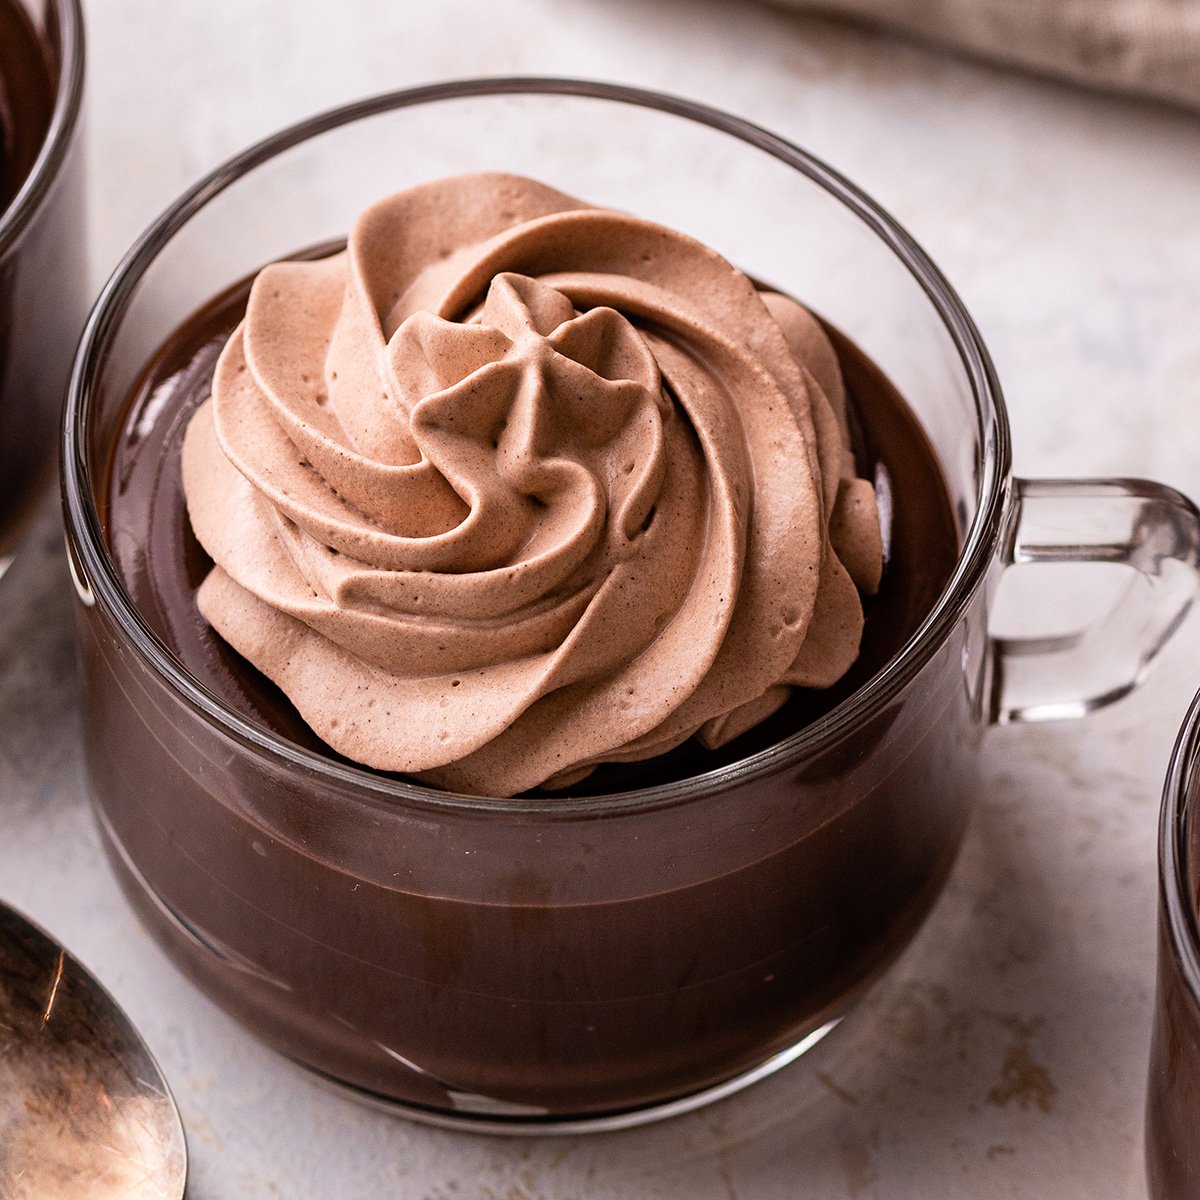 Chocolate Whipped Cream on top of chocolate pudding in a glass cup